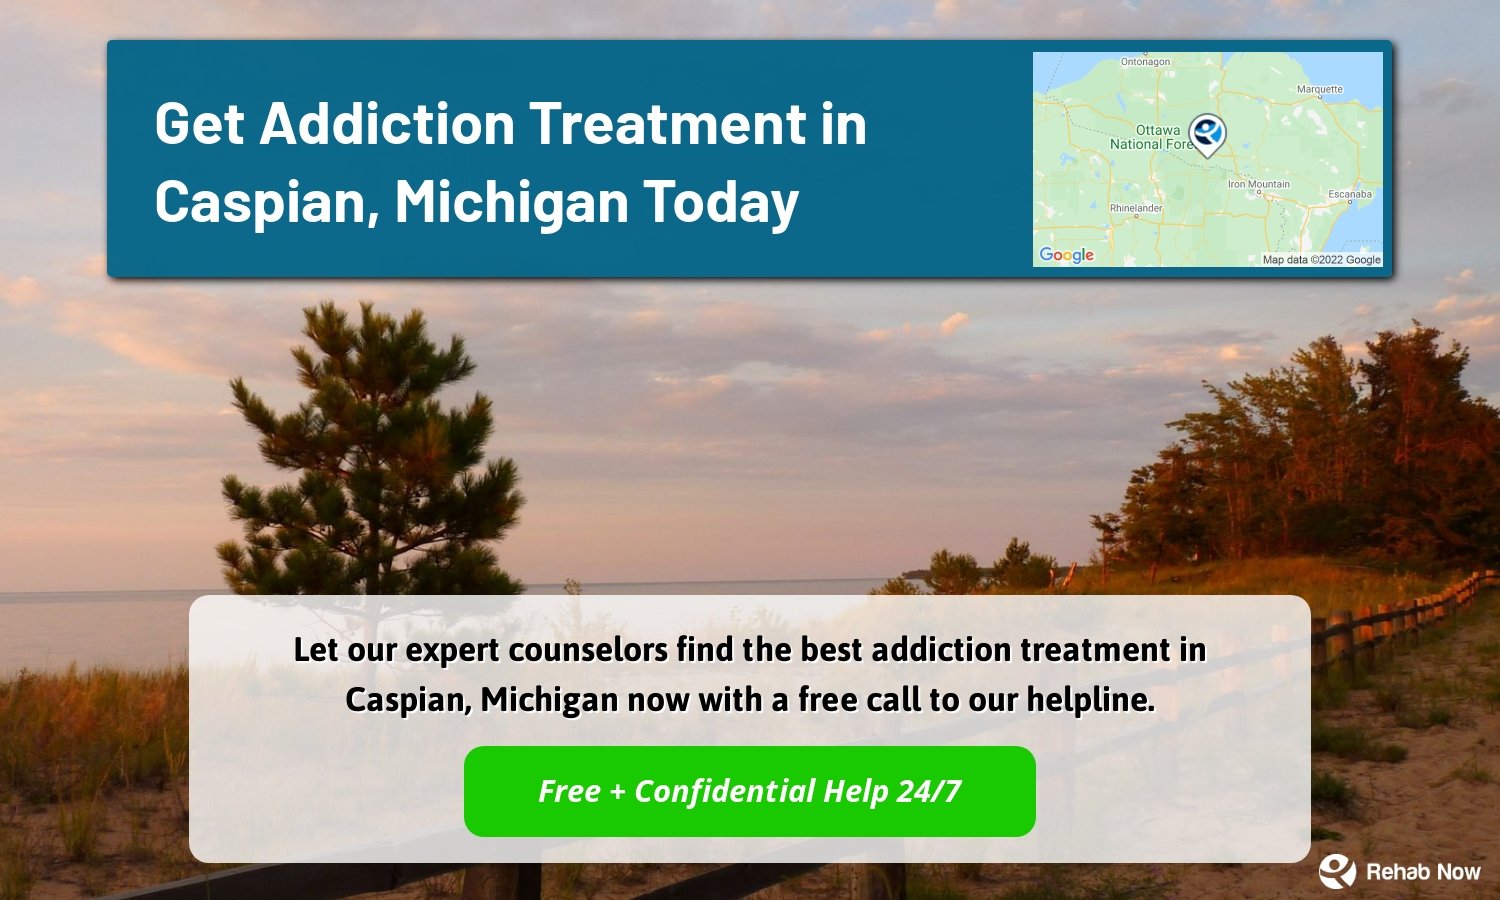 Let our expert counselors find the best addiction treatment in Caspian, Michigan now with a free call to our helpline.